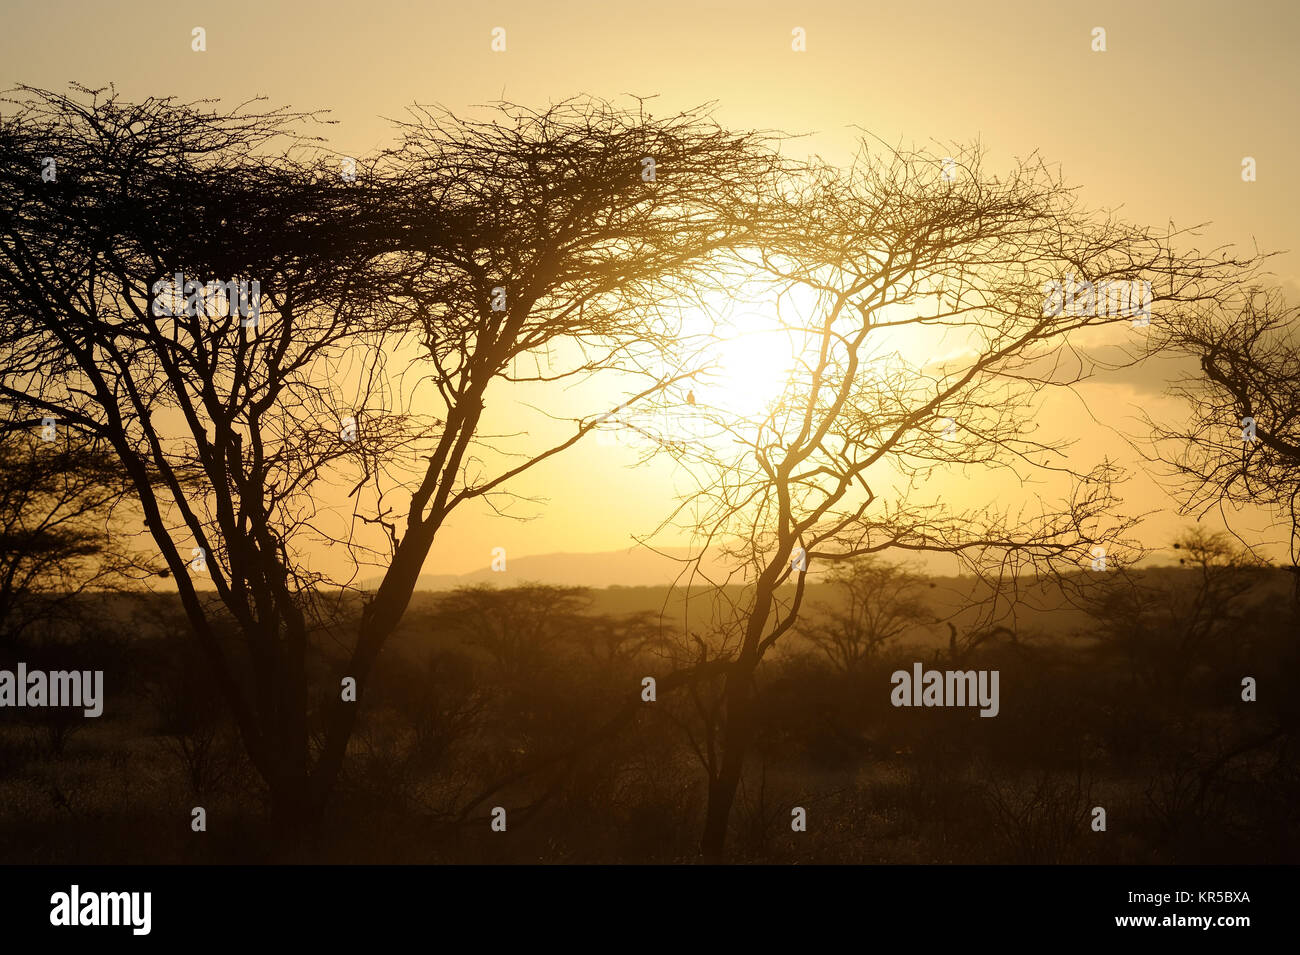 Sunset with silhouetted African savanna trees Stock Photo